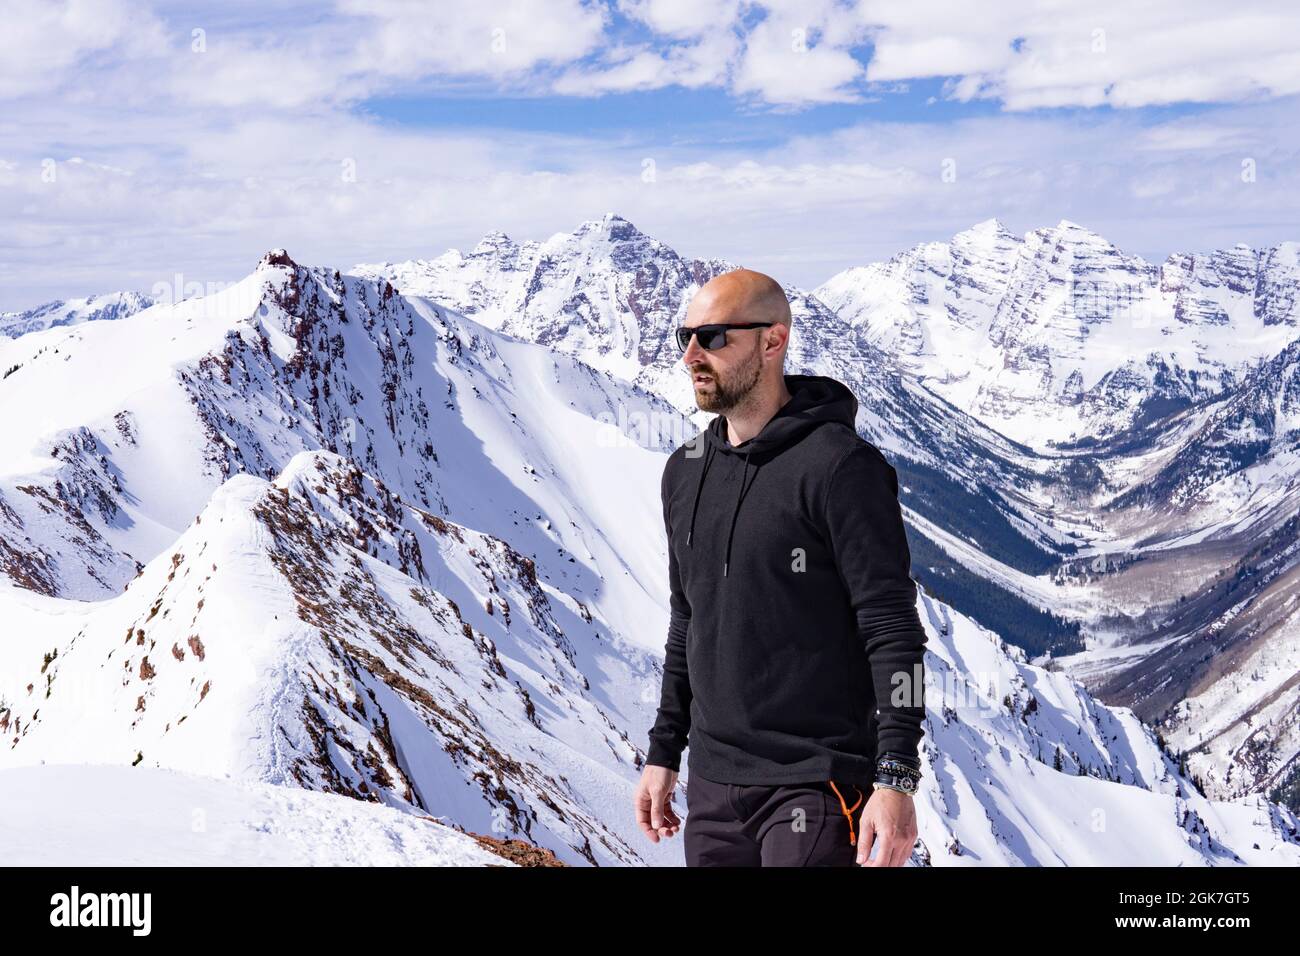 Male Model In Snow Mountain Landscape Extreme Exploration Concept Stock Photo